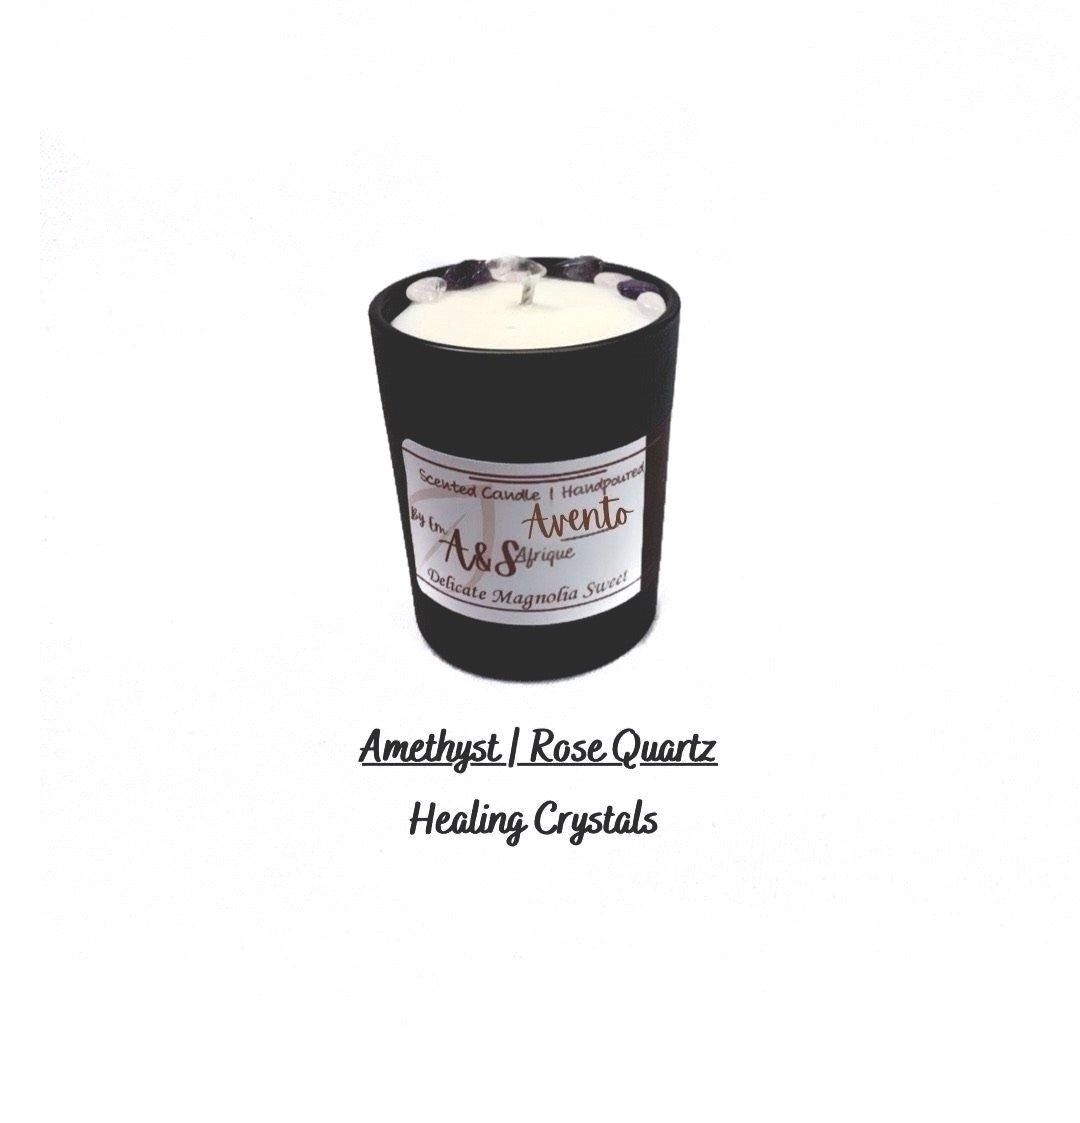 Scented Candles (Crystalised) | Home Fragrances | Scented Decorative Gifts - Art & Scents Afrique 